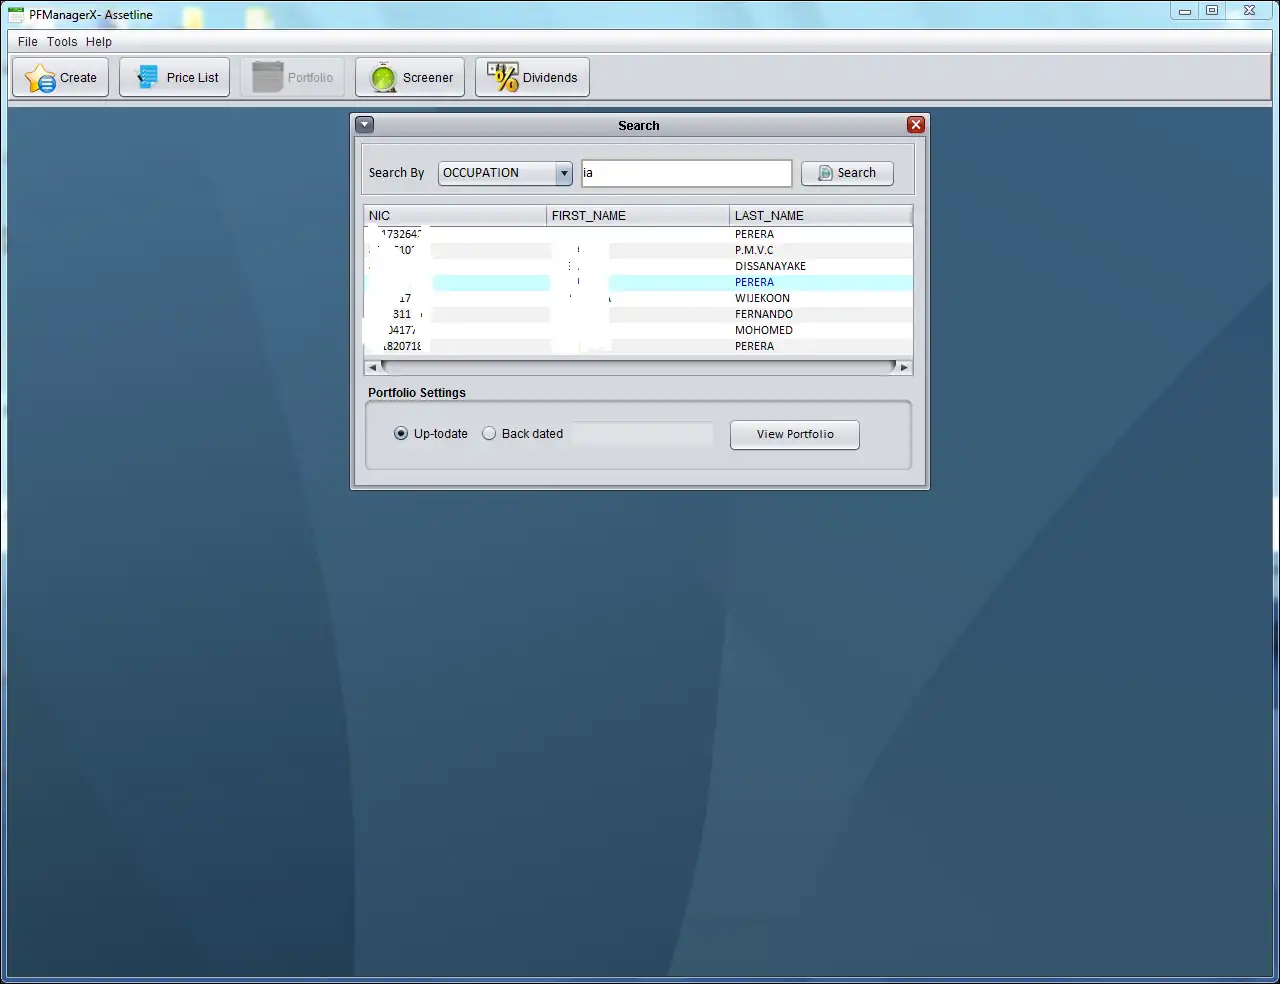 Download web tool or web app PFManagerX to run in Linux online